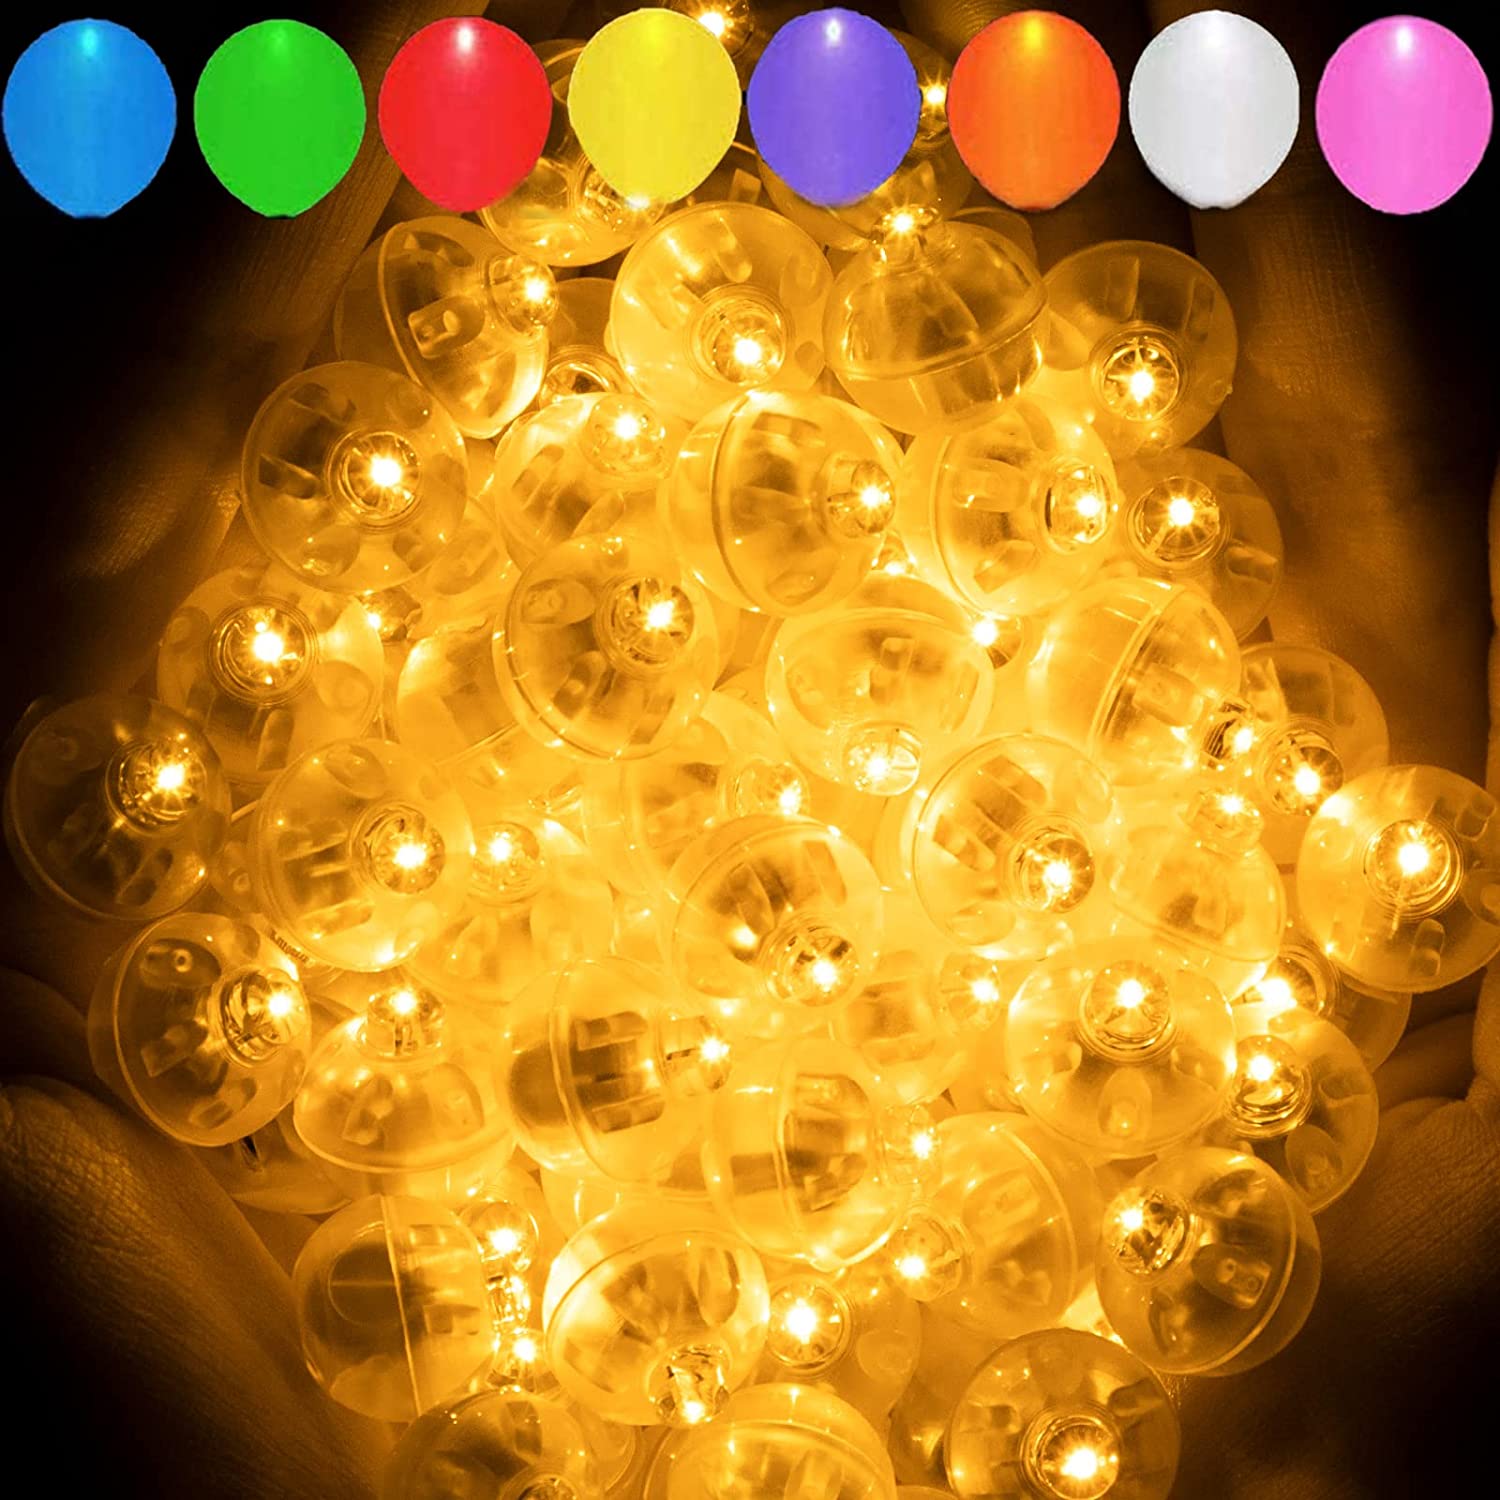 20 Led Light Up Balloons Mixed Colors Flashing Dure 24 heures Fête